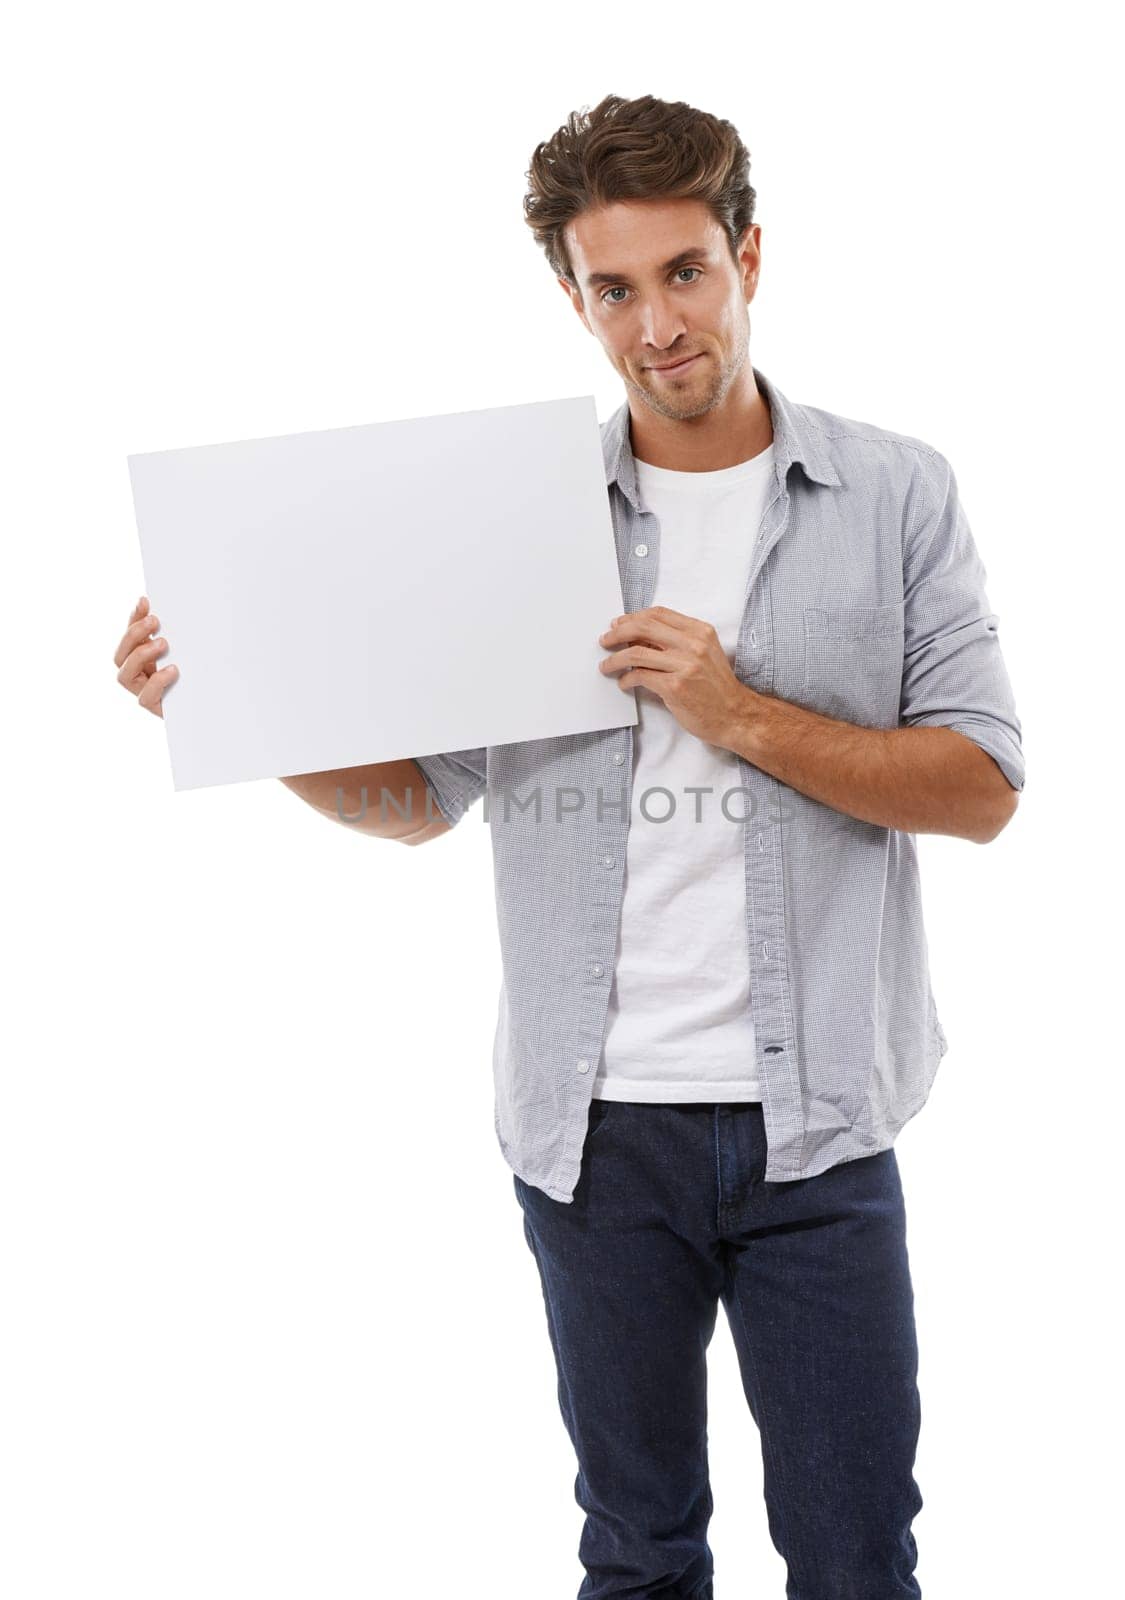 Poster, mockup and portrait of man with sign, presentation and communication of announcement in white background. Blank, placard and person advertising in studio, space and billboard for news or info.